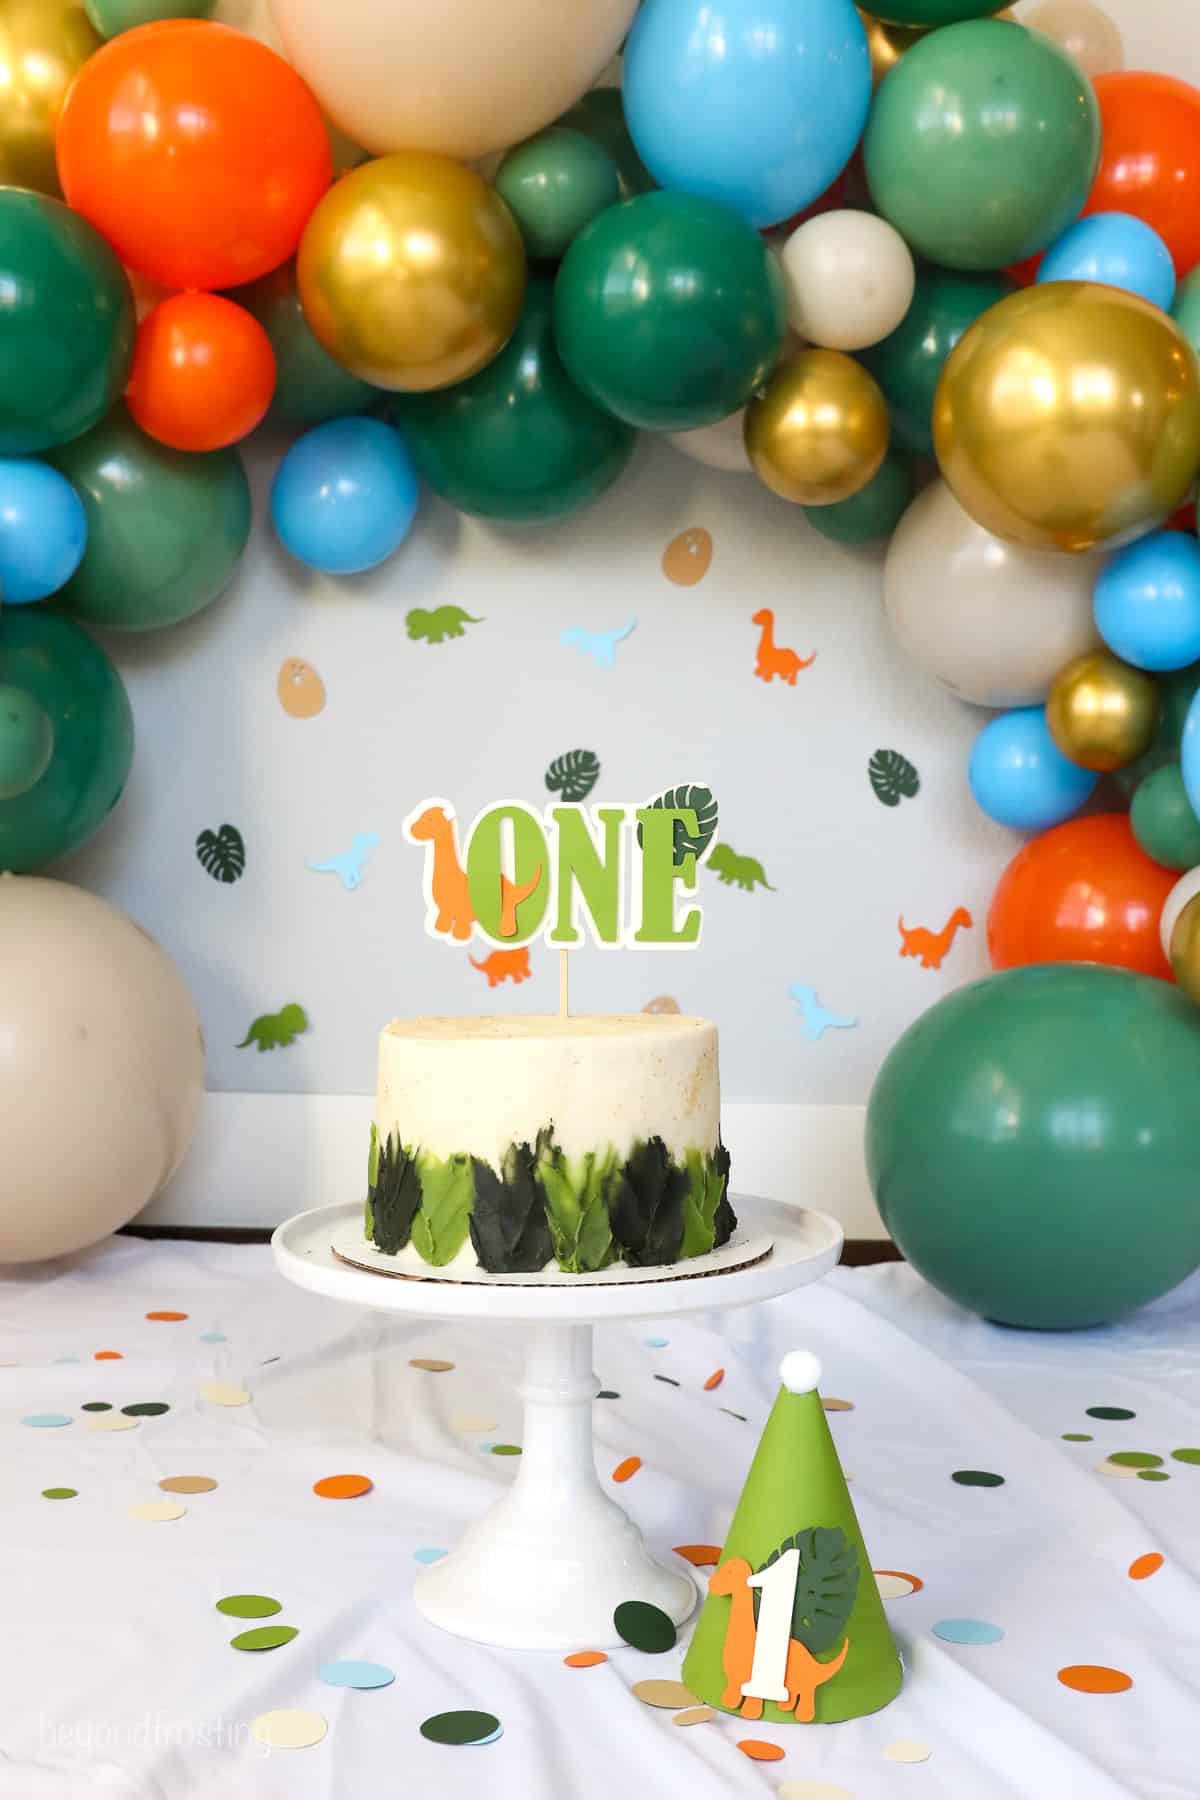 Full shot of a decorated dinosaur cake on a cake stand surrounded by confetti and a birthday hat, framed by a balloon arch in the background.